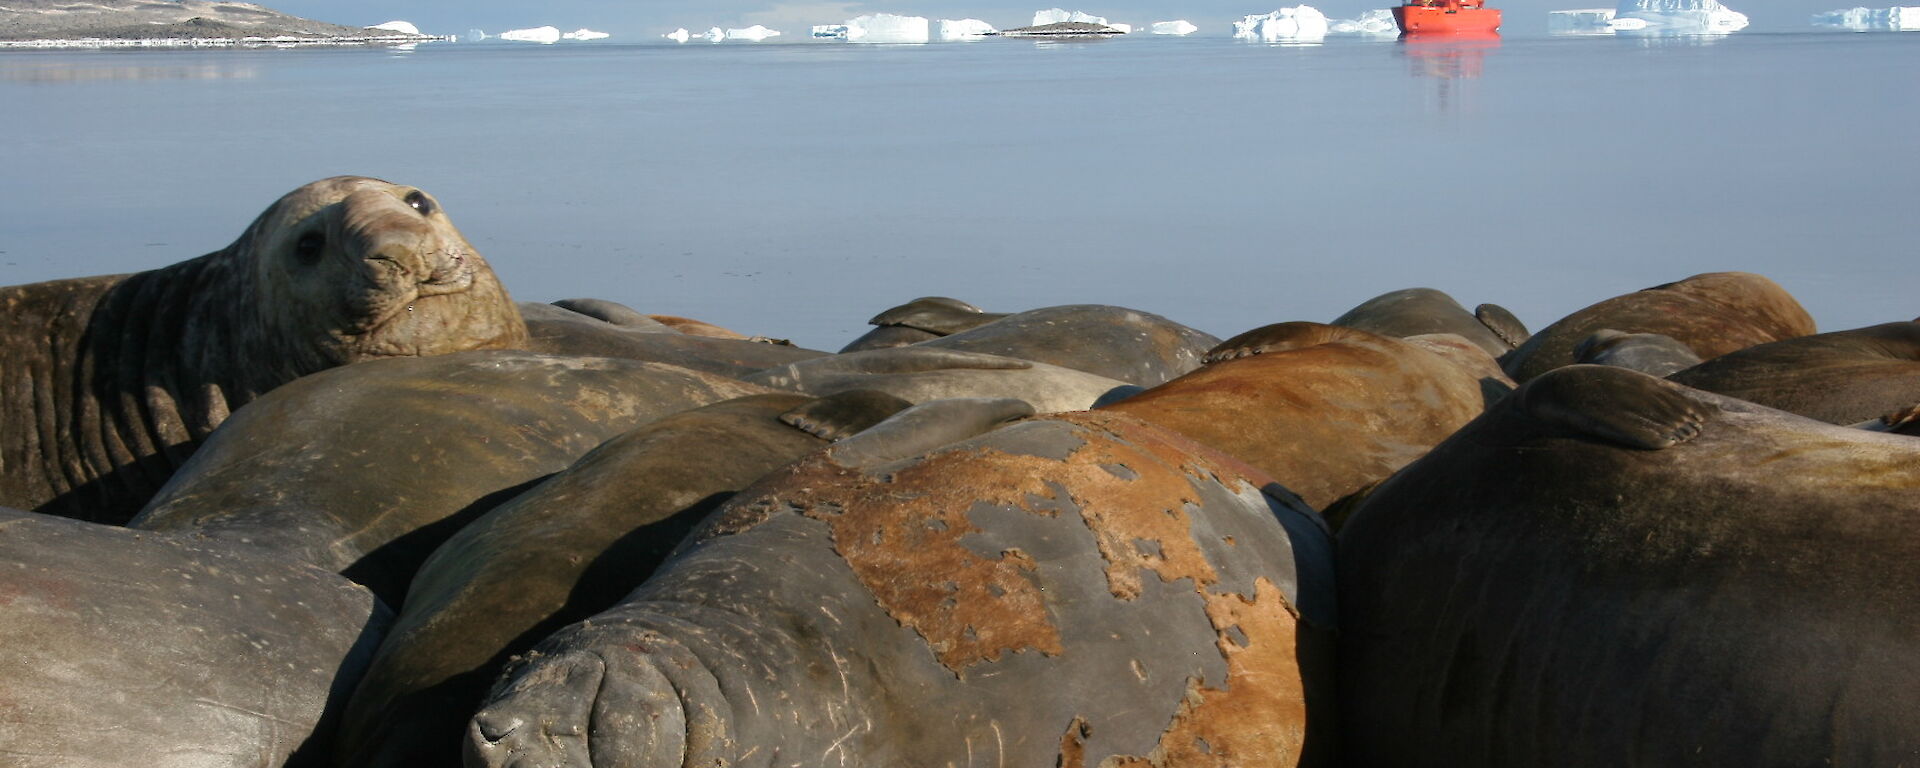 Southern elephant seals on the beach at Davis